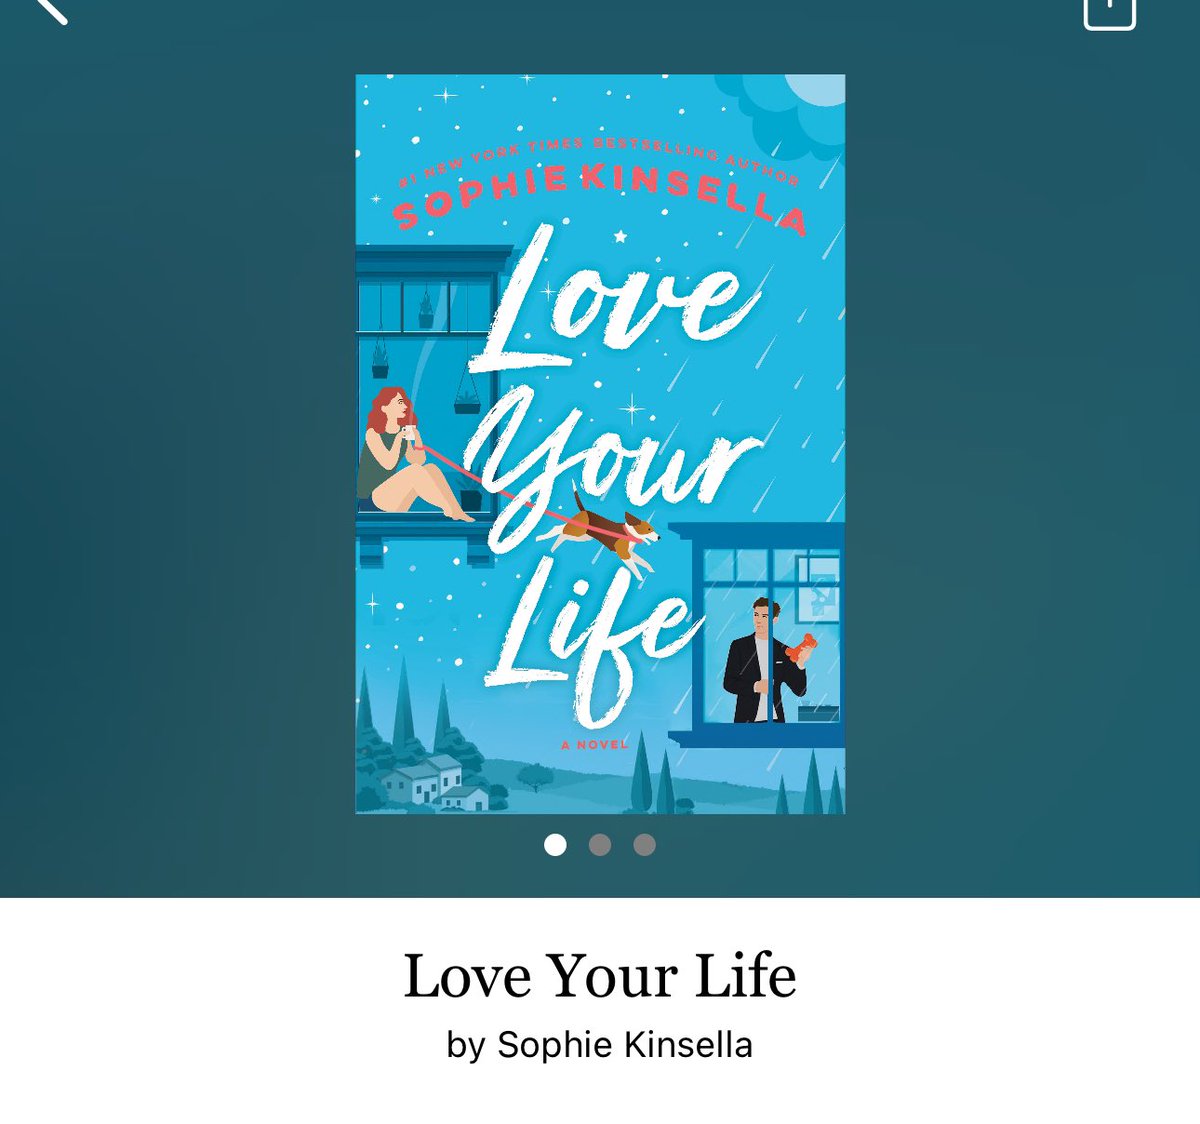 Love Your Life by Sophie Kinsella 

#LoveYourLife by #SophieKinsella #5979 #27chapters #46pages #11houraudiobook #audiobook #128of400 #4for1 #AvaAndMatt #february2024 #clearingoffreadingshelves #whatsnext #readitquick